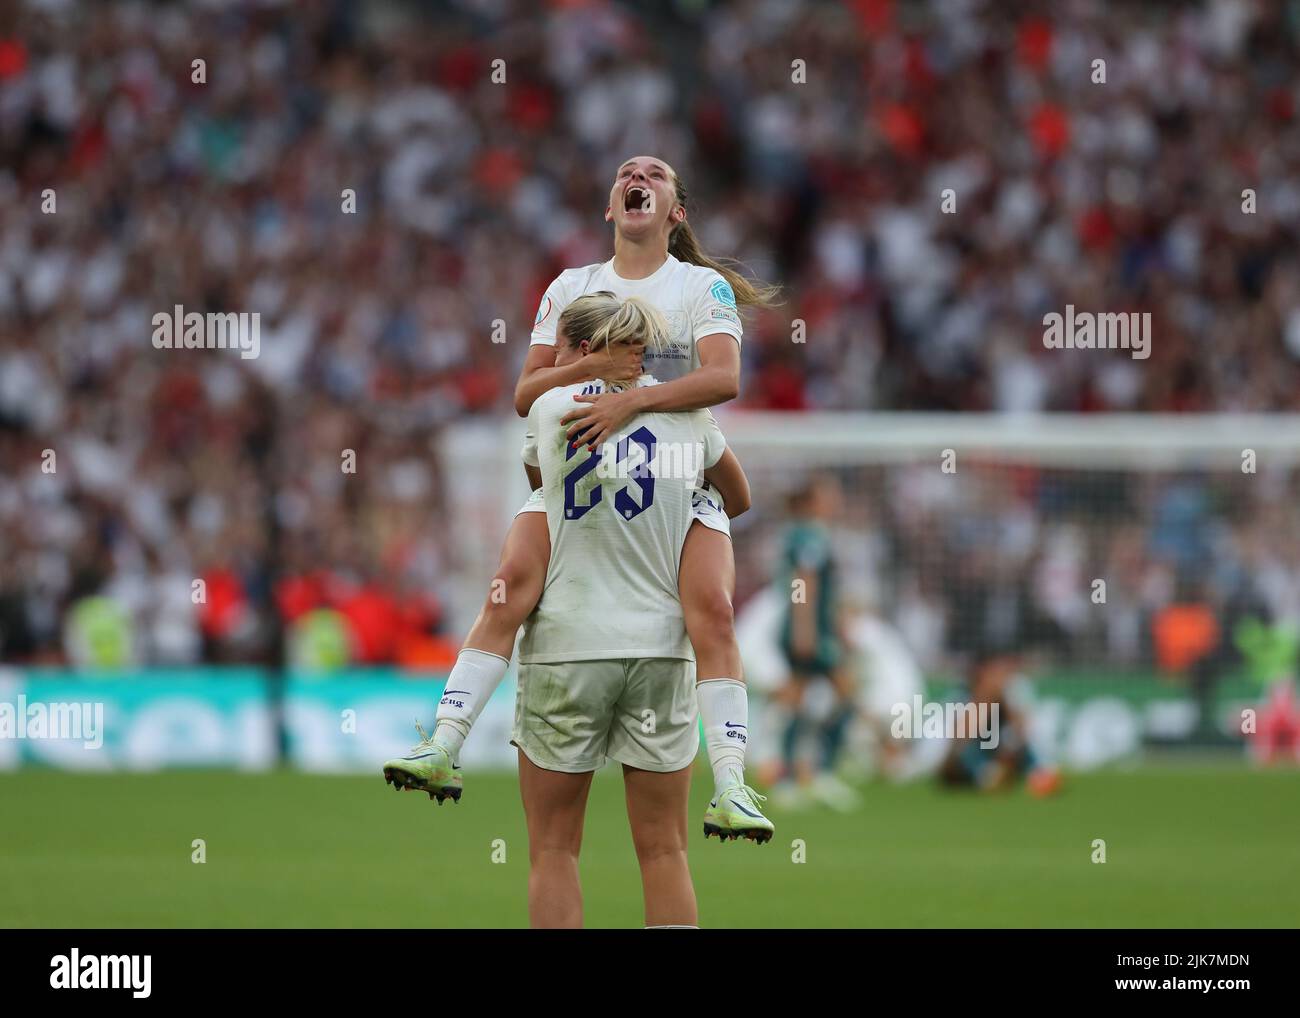 London, UK. 31st July, 2022. 31st July 2022; Wembley Stadium, London, England: Womens European International final, England versus Germany: Ella Toone of England celebrates with Alessia Russo of England after full time as England are UEFA European Women's Football Champions Credit: Action Plus Sports Images/Alamy Live News Credit: Action Plus Sports Images/Alamy Live News Stock Photo